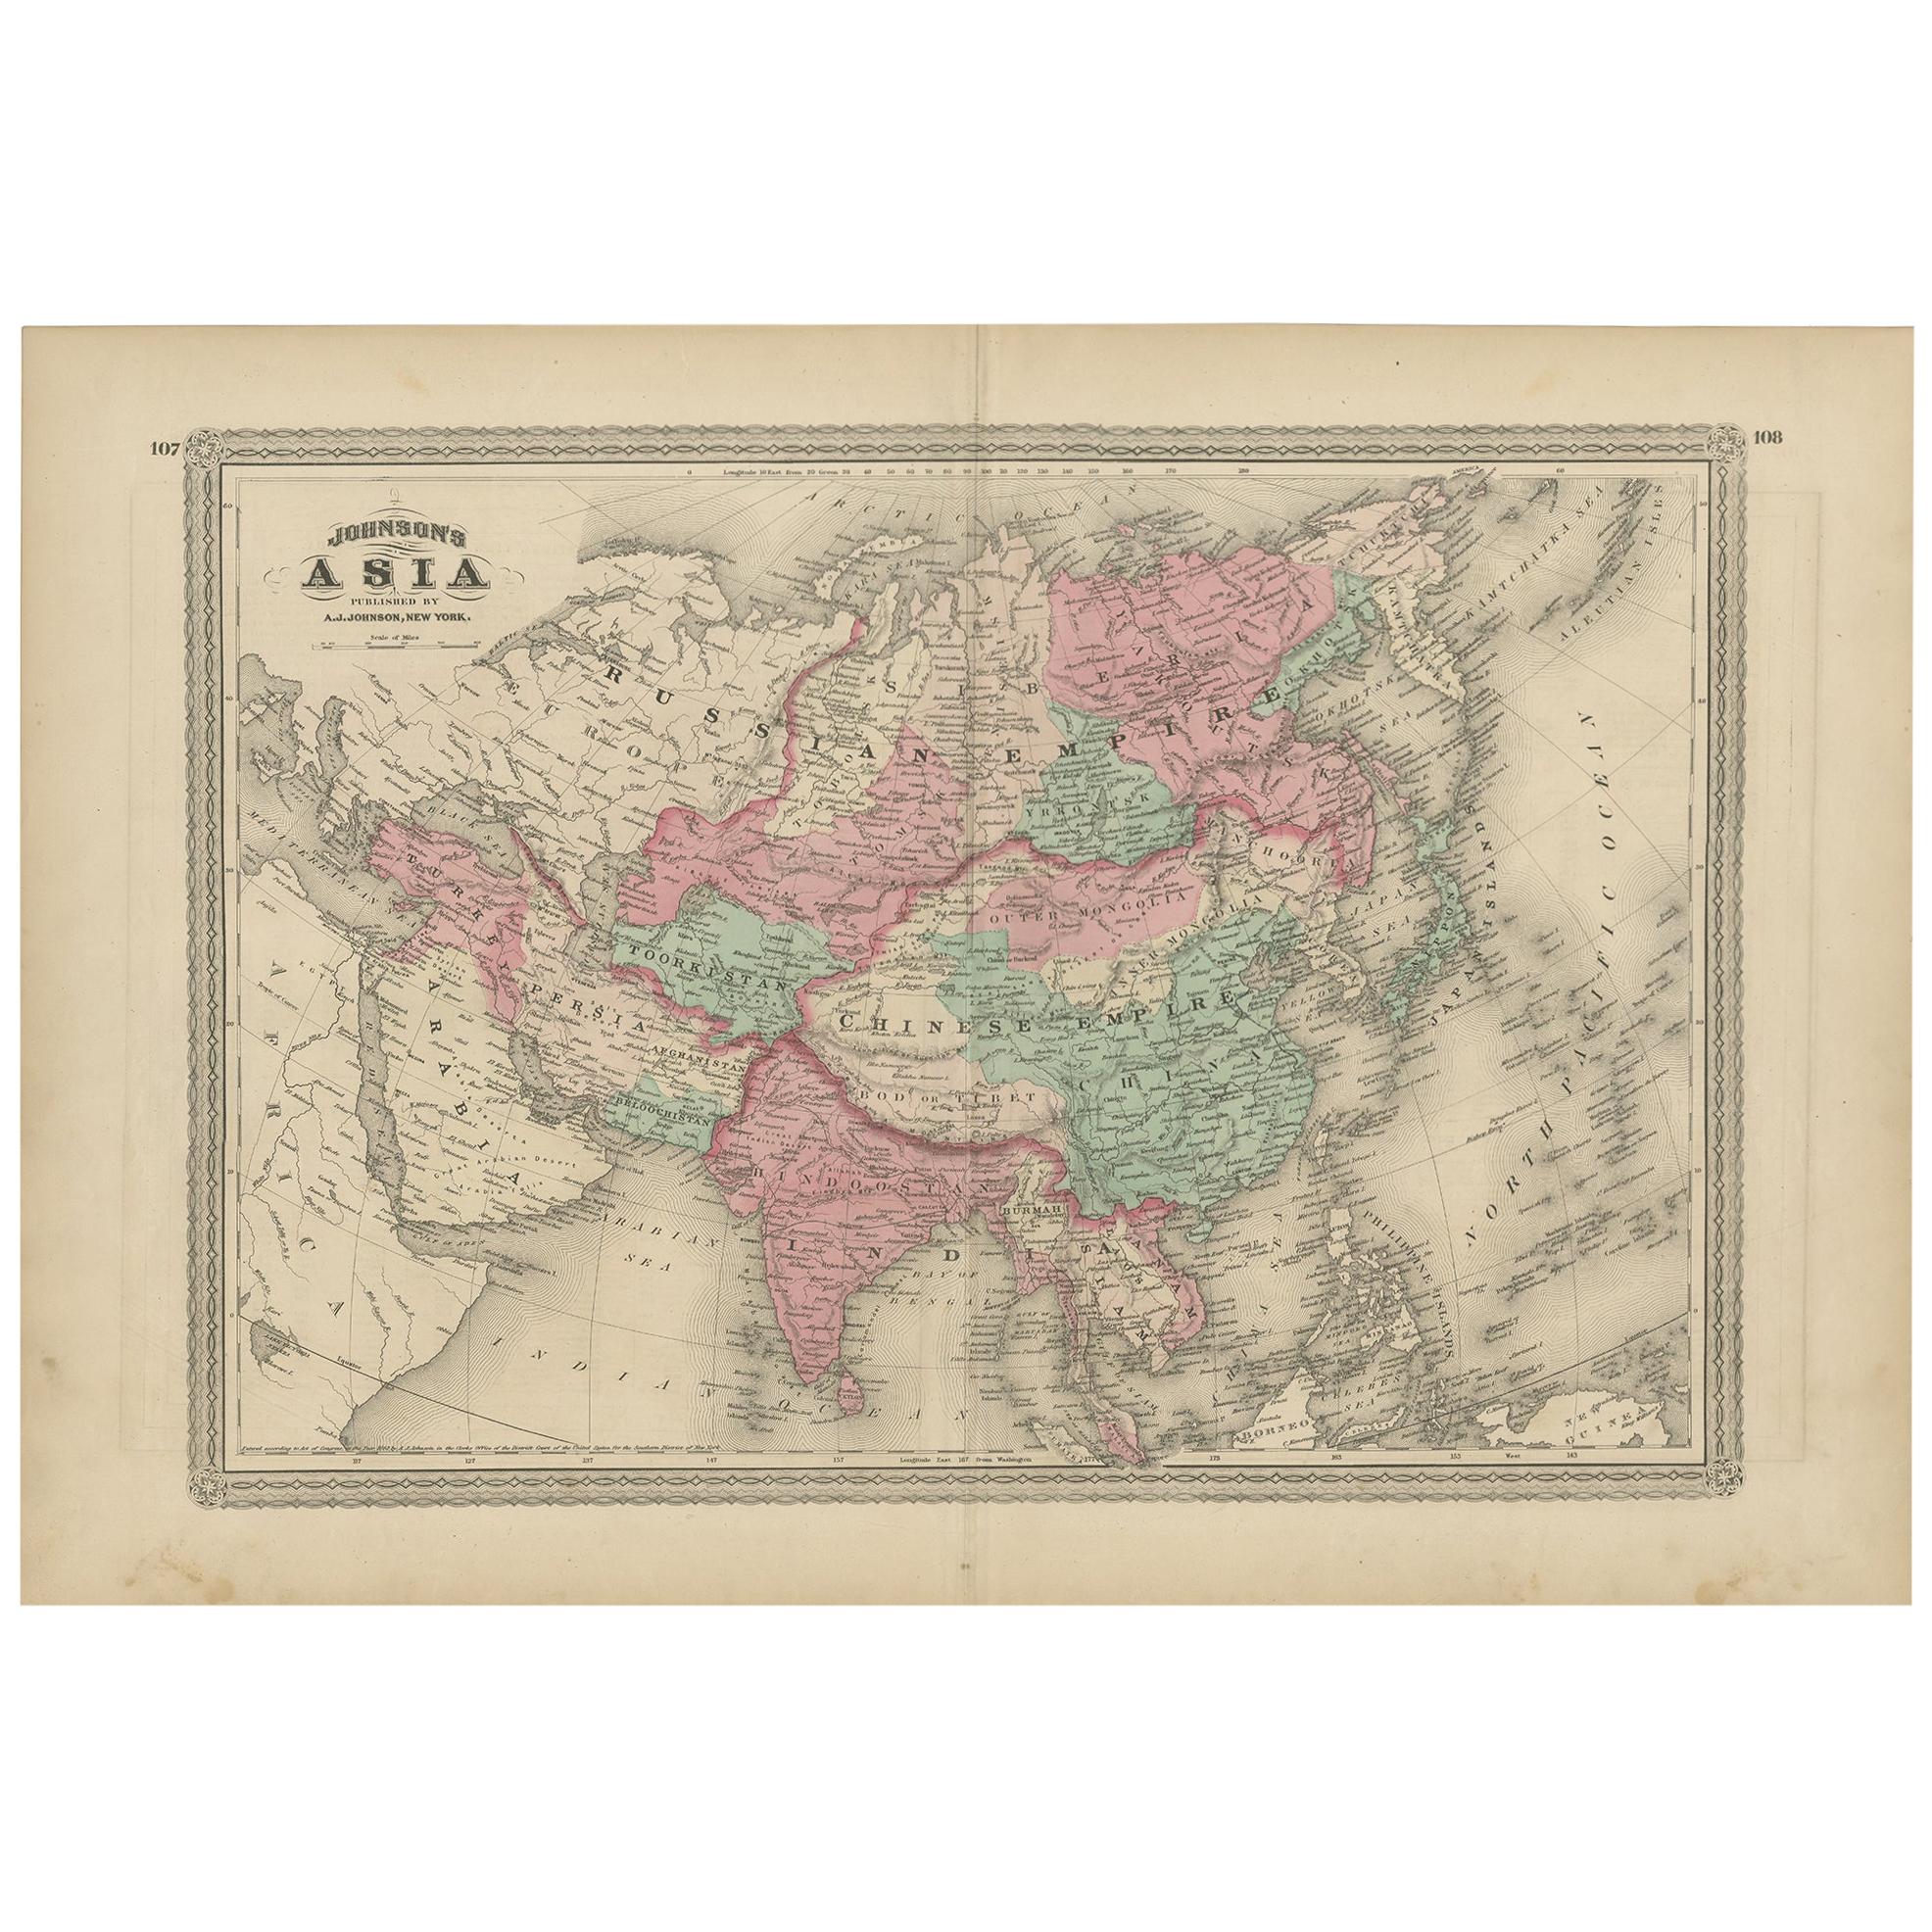 Antique Map of Asia by Johnson, 1872